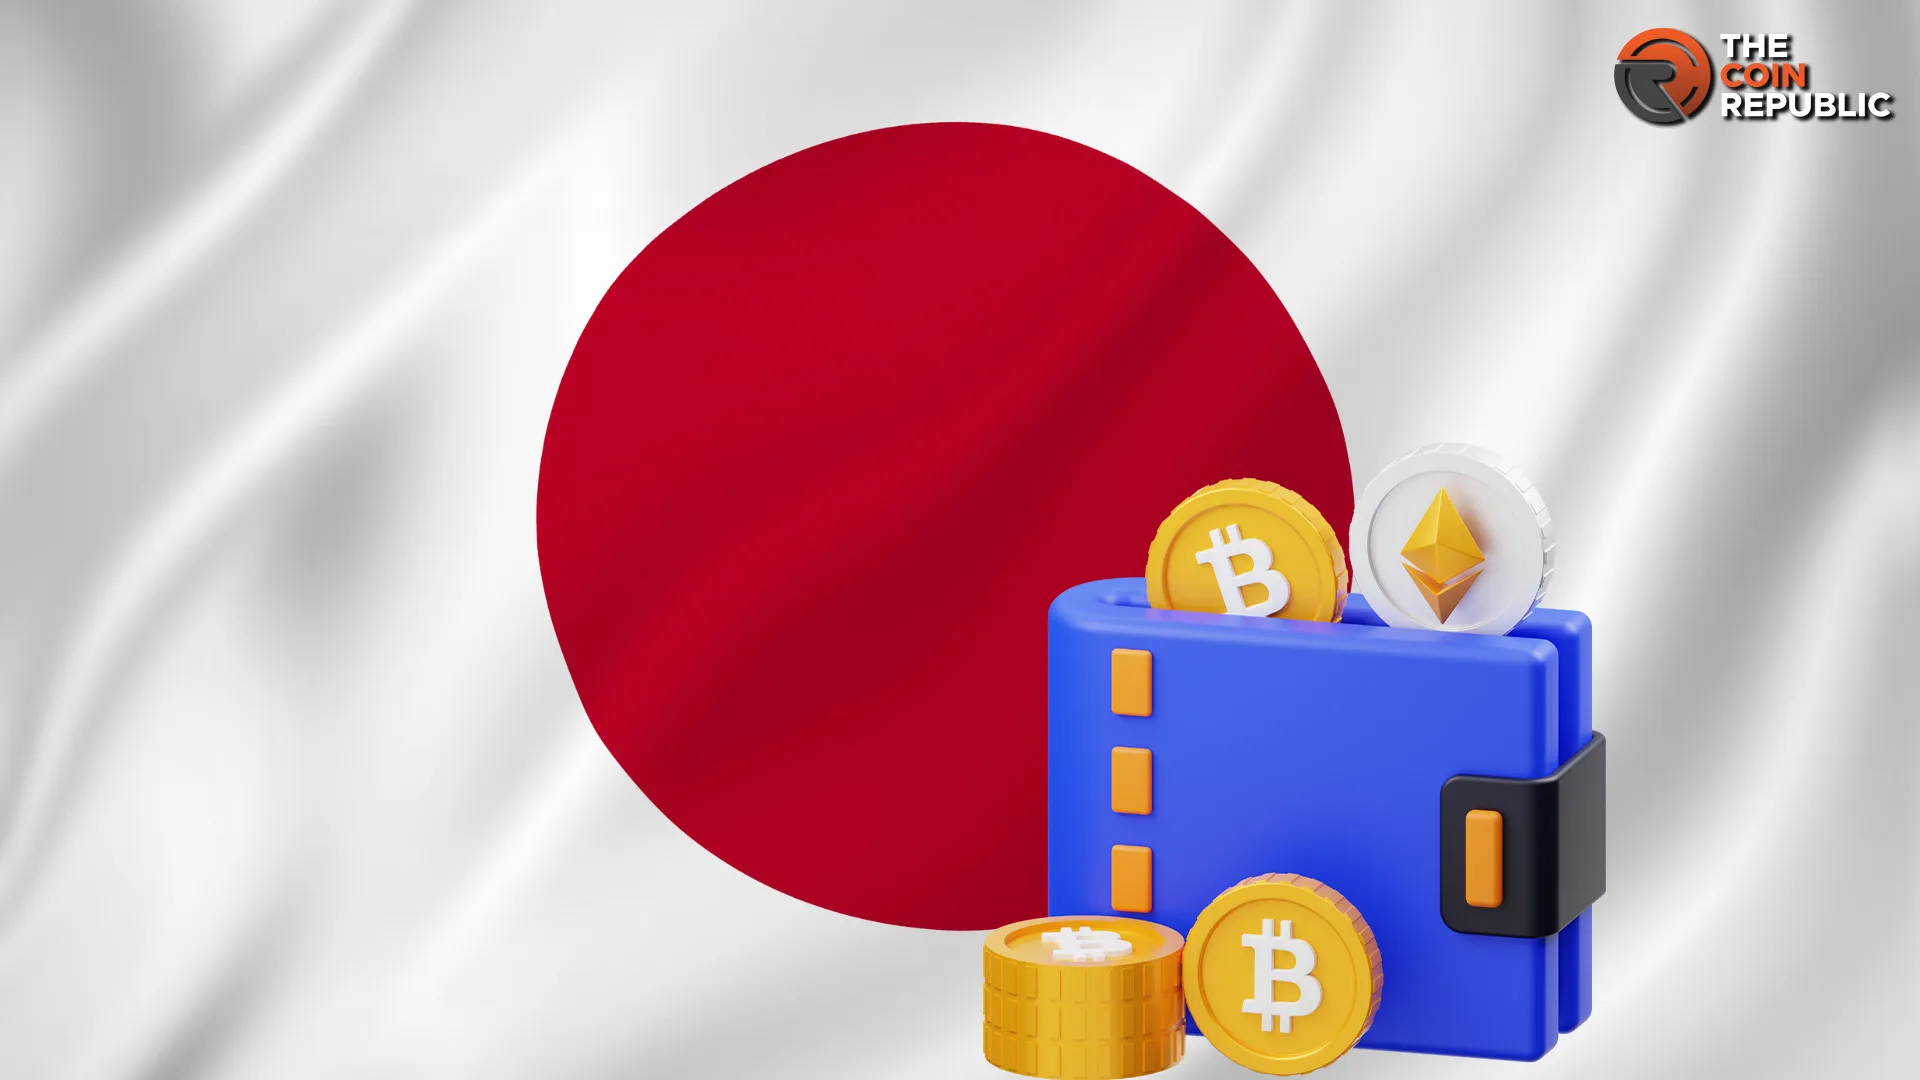 Japanese Telecommunication Giants to Launch Crypto Wallet- Report 